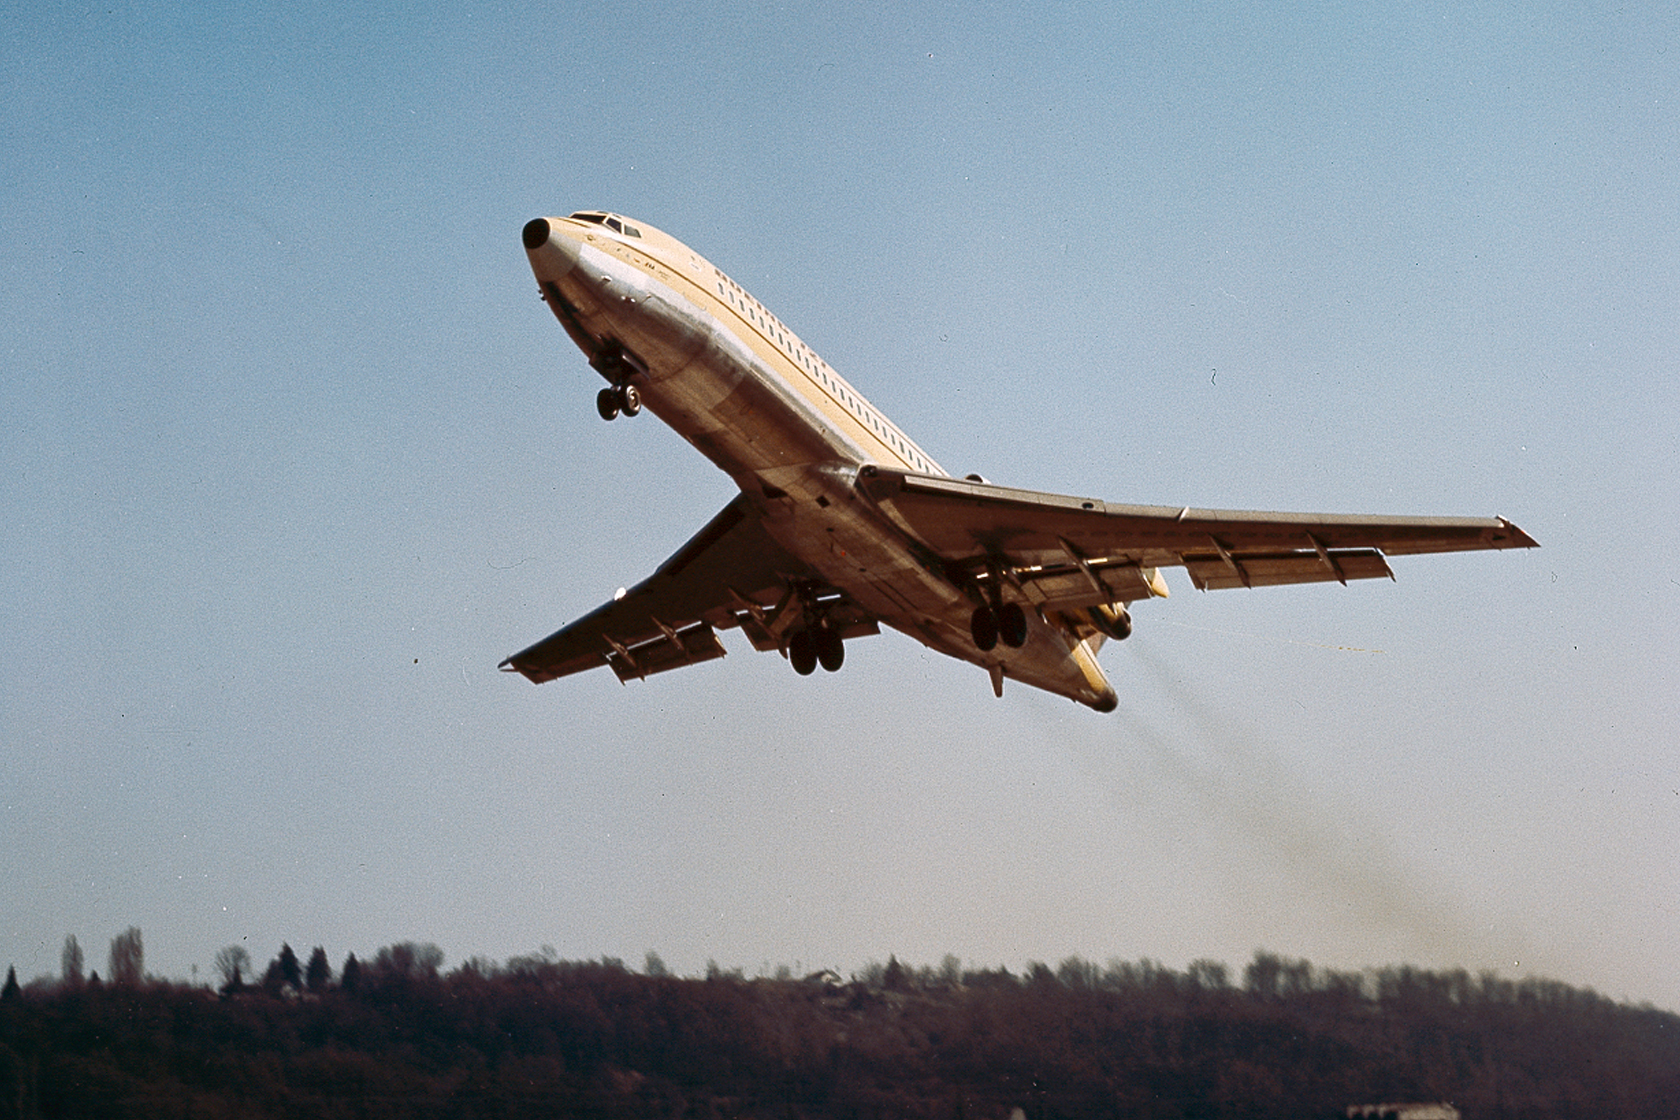 The prototype Boeing 727, N7001U, takes off on its first flight, 9 February 1963. (The Museum of Flight)